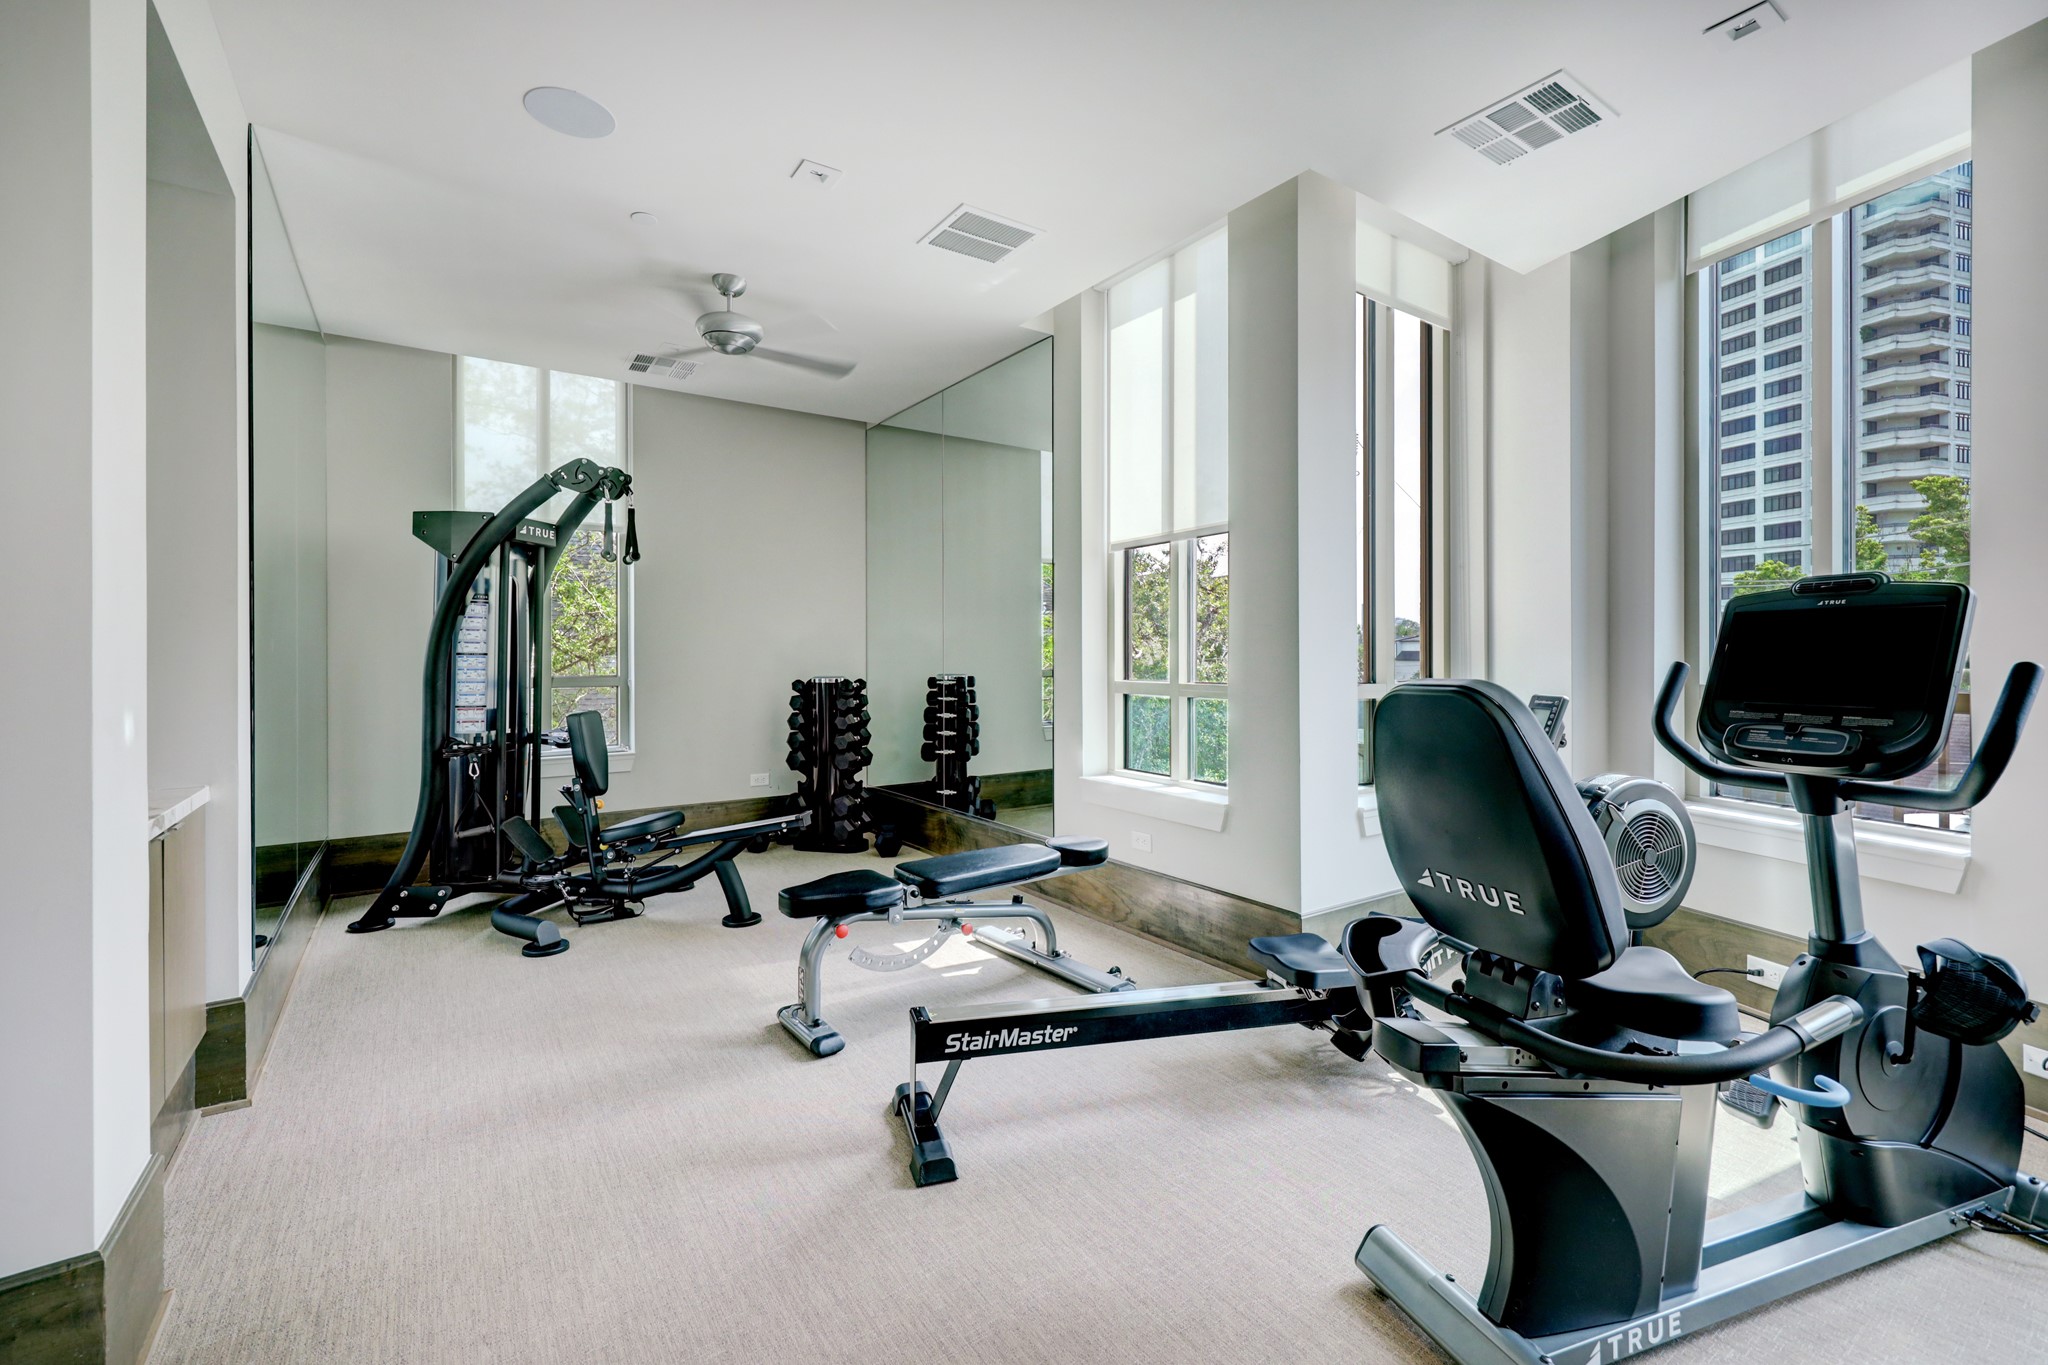 The third floor EXERCISE ROOM with its multiple machines for the active resident to work out while viewing the River Oaks area from the facility's expansive windows.